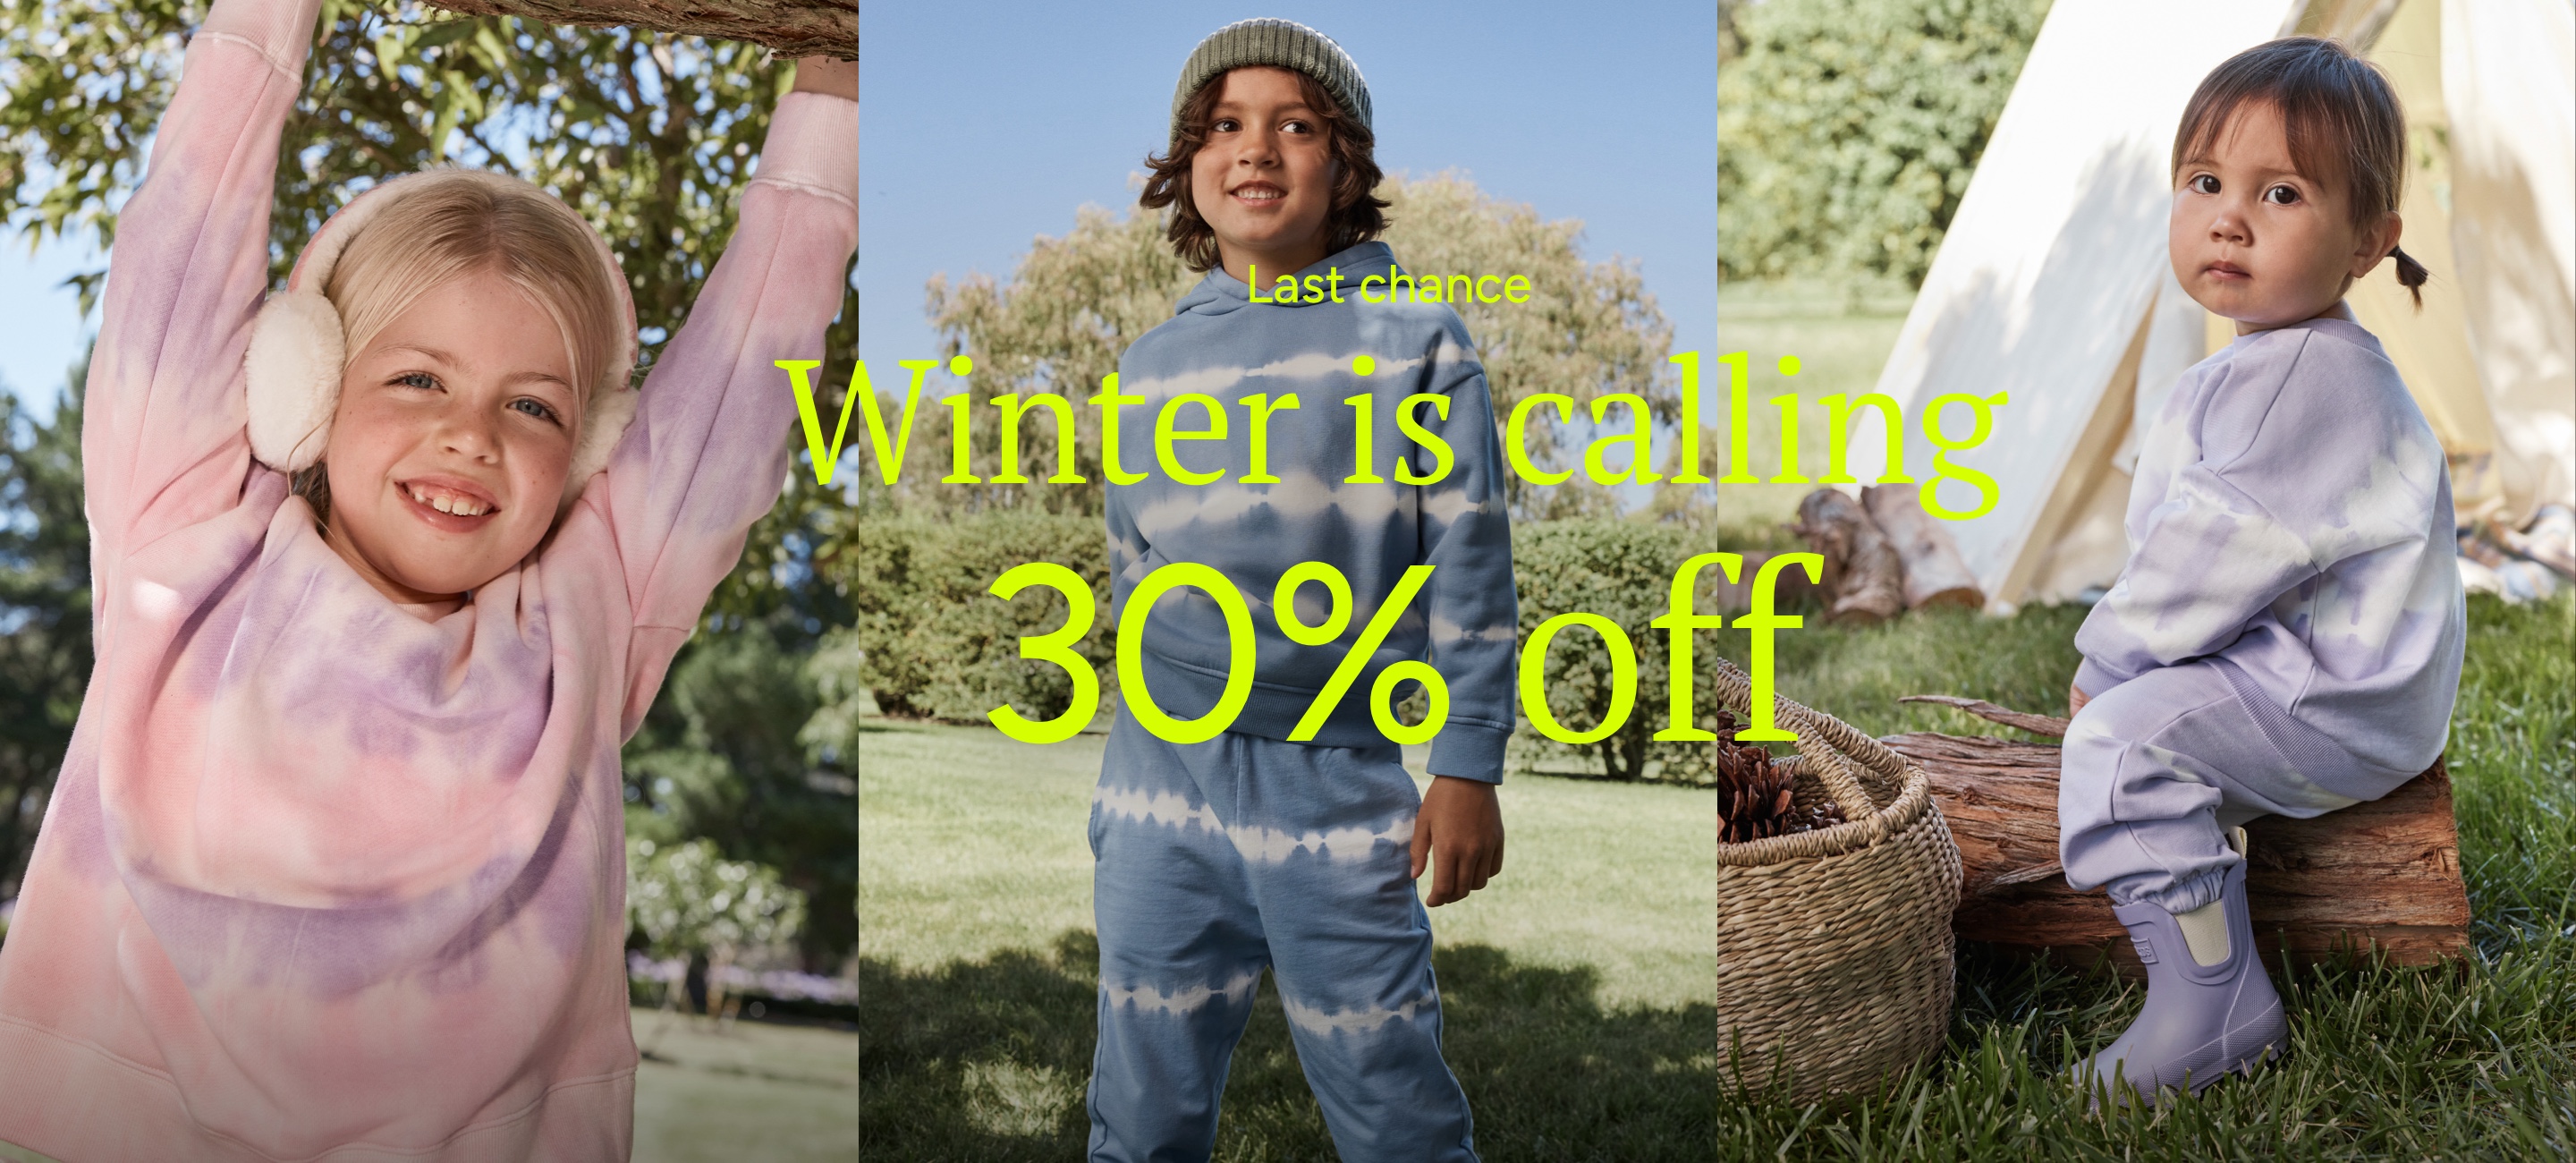 Winter is calling. Last Chance. 30% off.